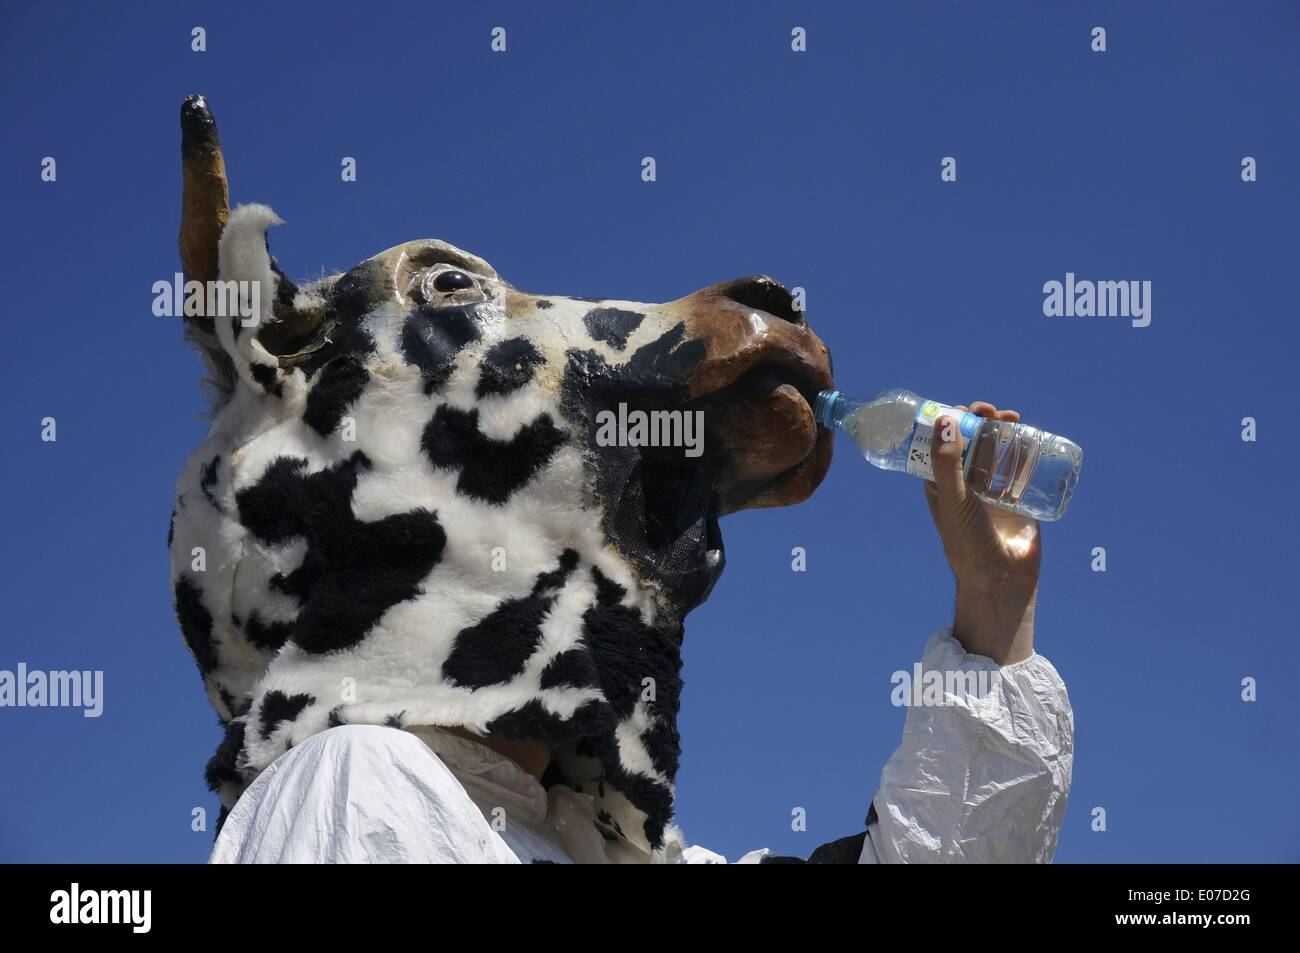 Berlin, Germany. 20th July, 2013. A protester dressed as a cow drinks from a water bottle at the Veggie Parade at Pariser Platz in Berlin, Germany, 20 July 2013. The Veggie Parade is a demonstration of vegans against the consumption of animal products. Fotoarchiv für Zeitgeschichte - NO WIRE SERVICE/dpa/Alamy Live News Stock Photo